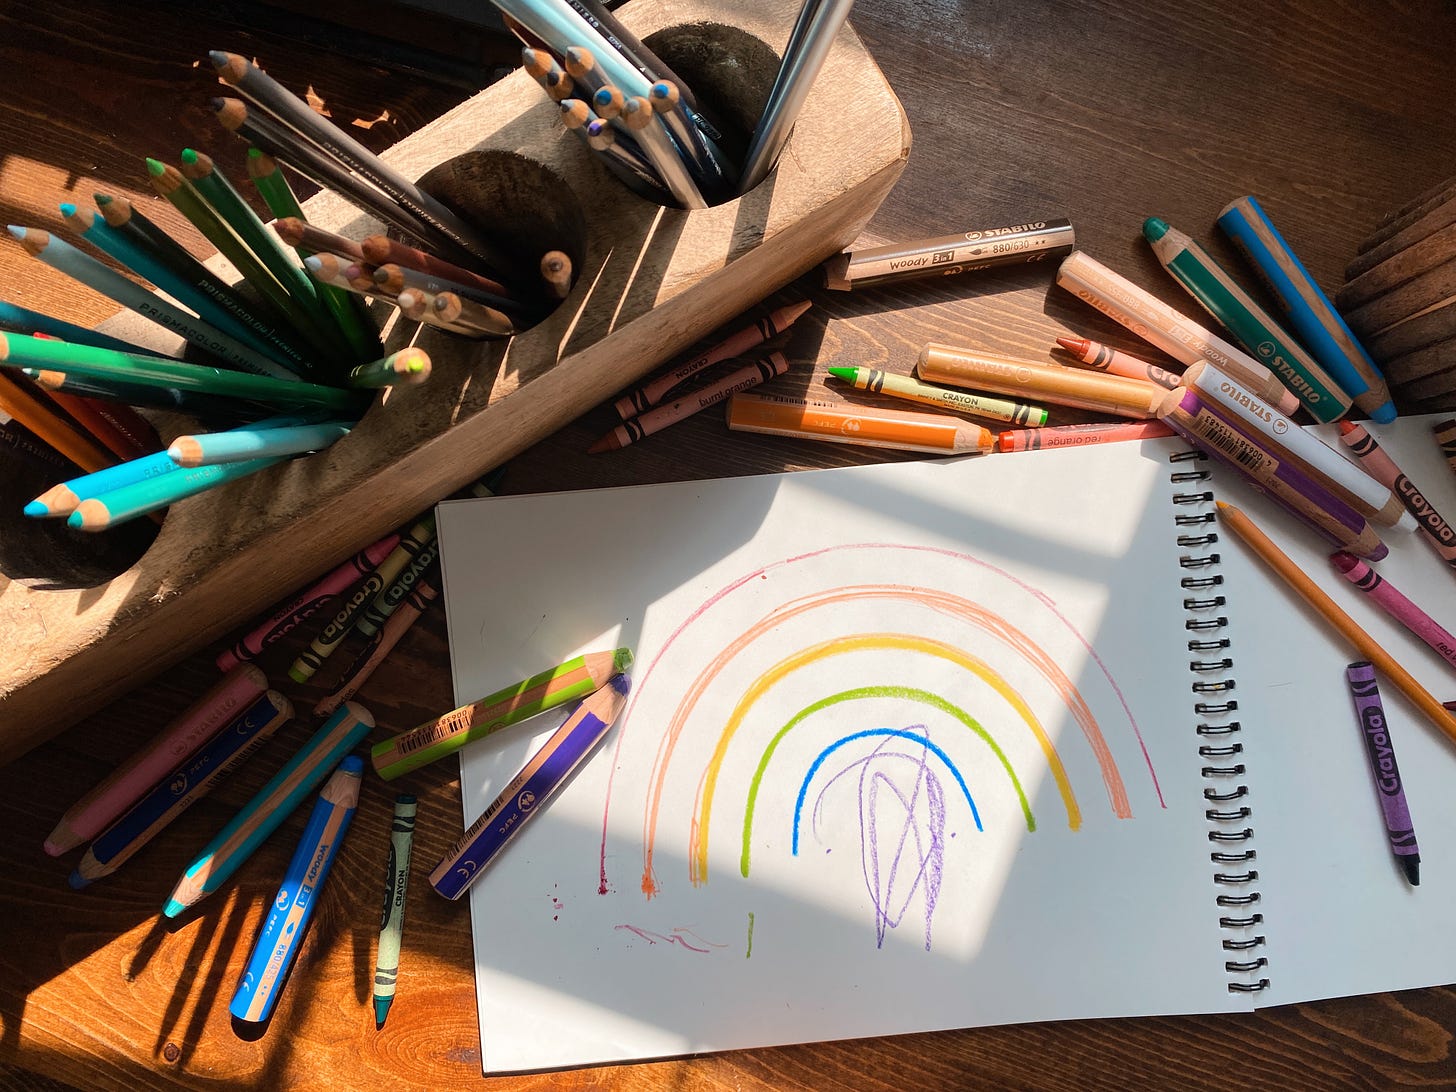 Crayons and colored pencils surround a sketchbook with a kid drawn rainbow. A shaft of sunlight comes in from the window.